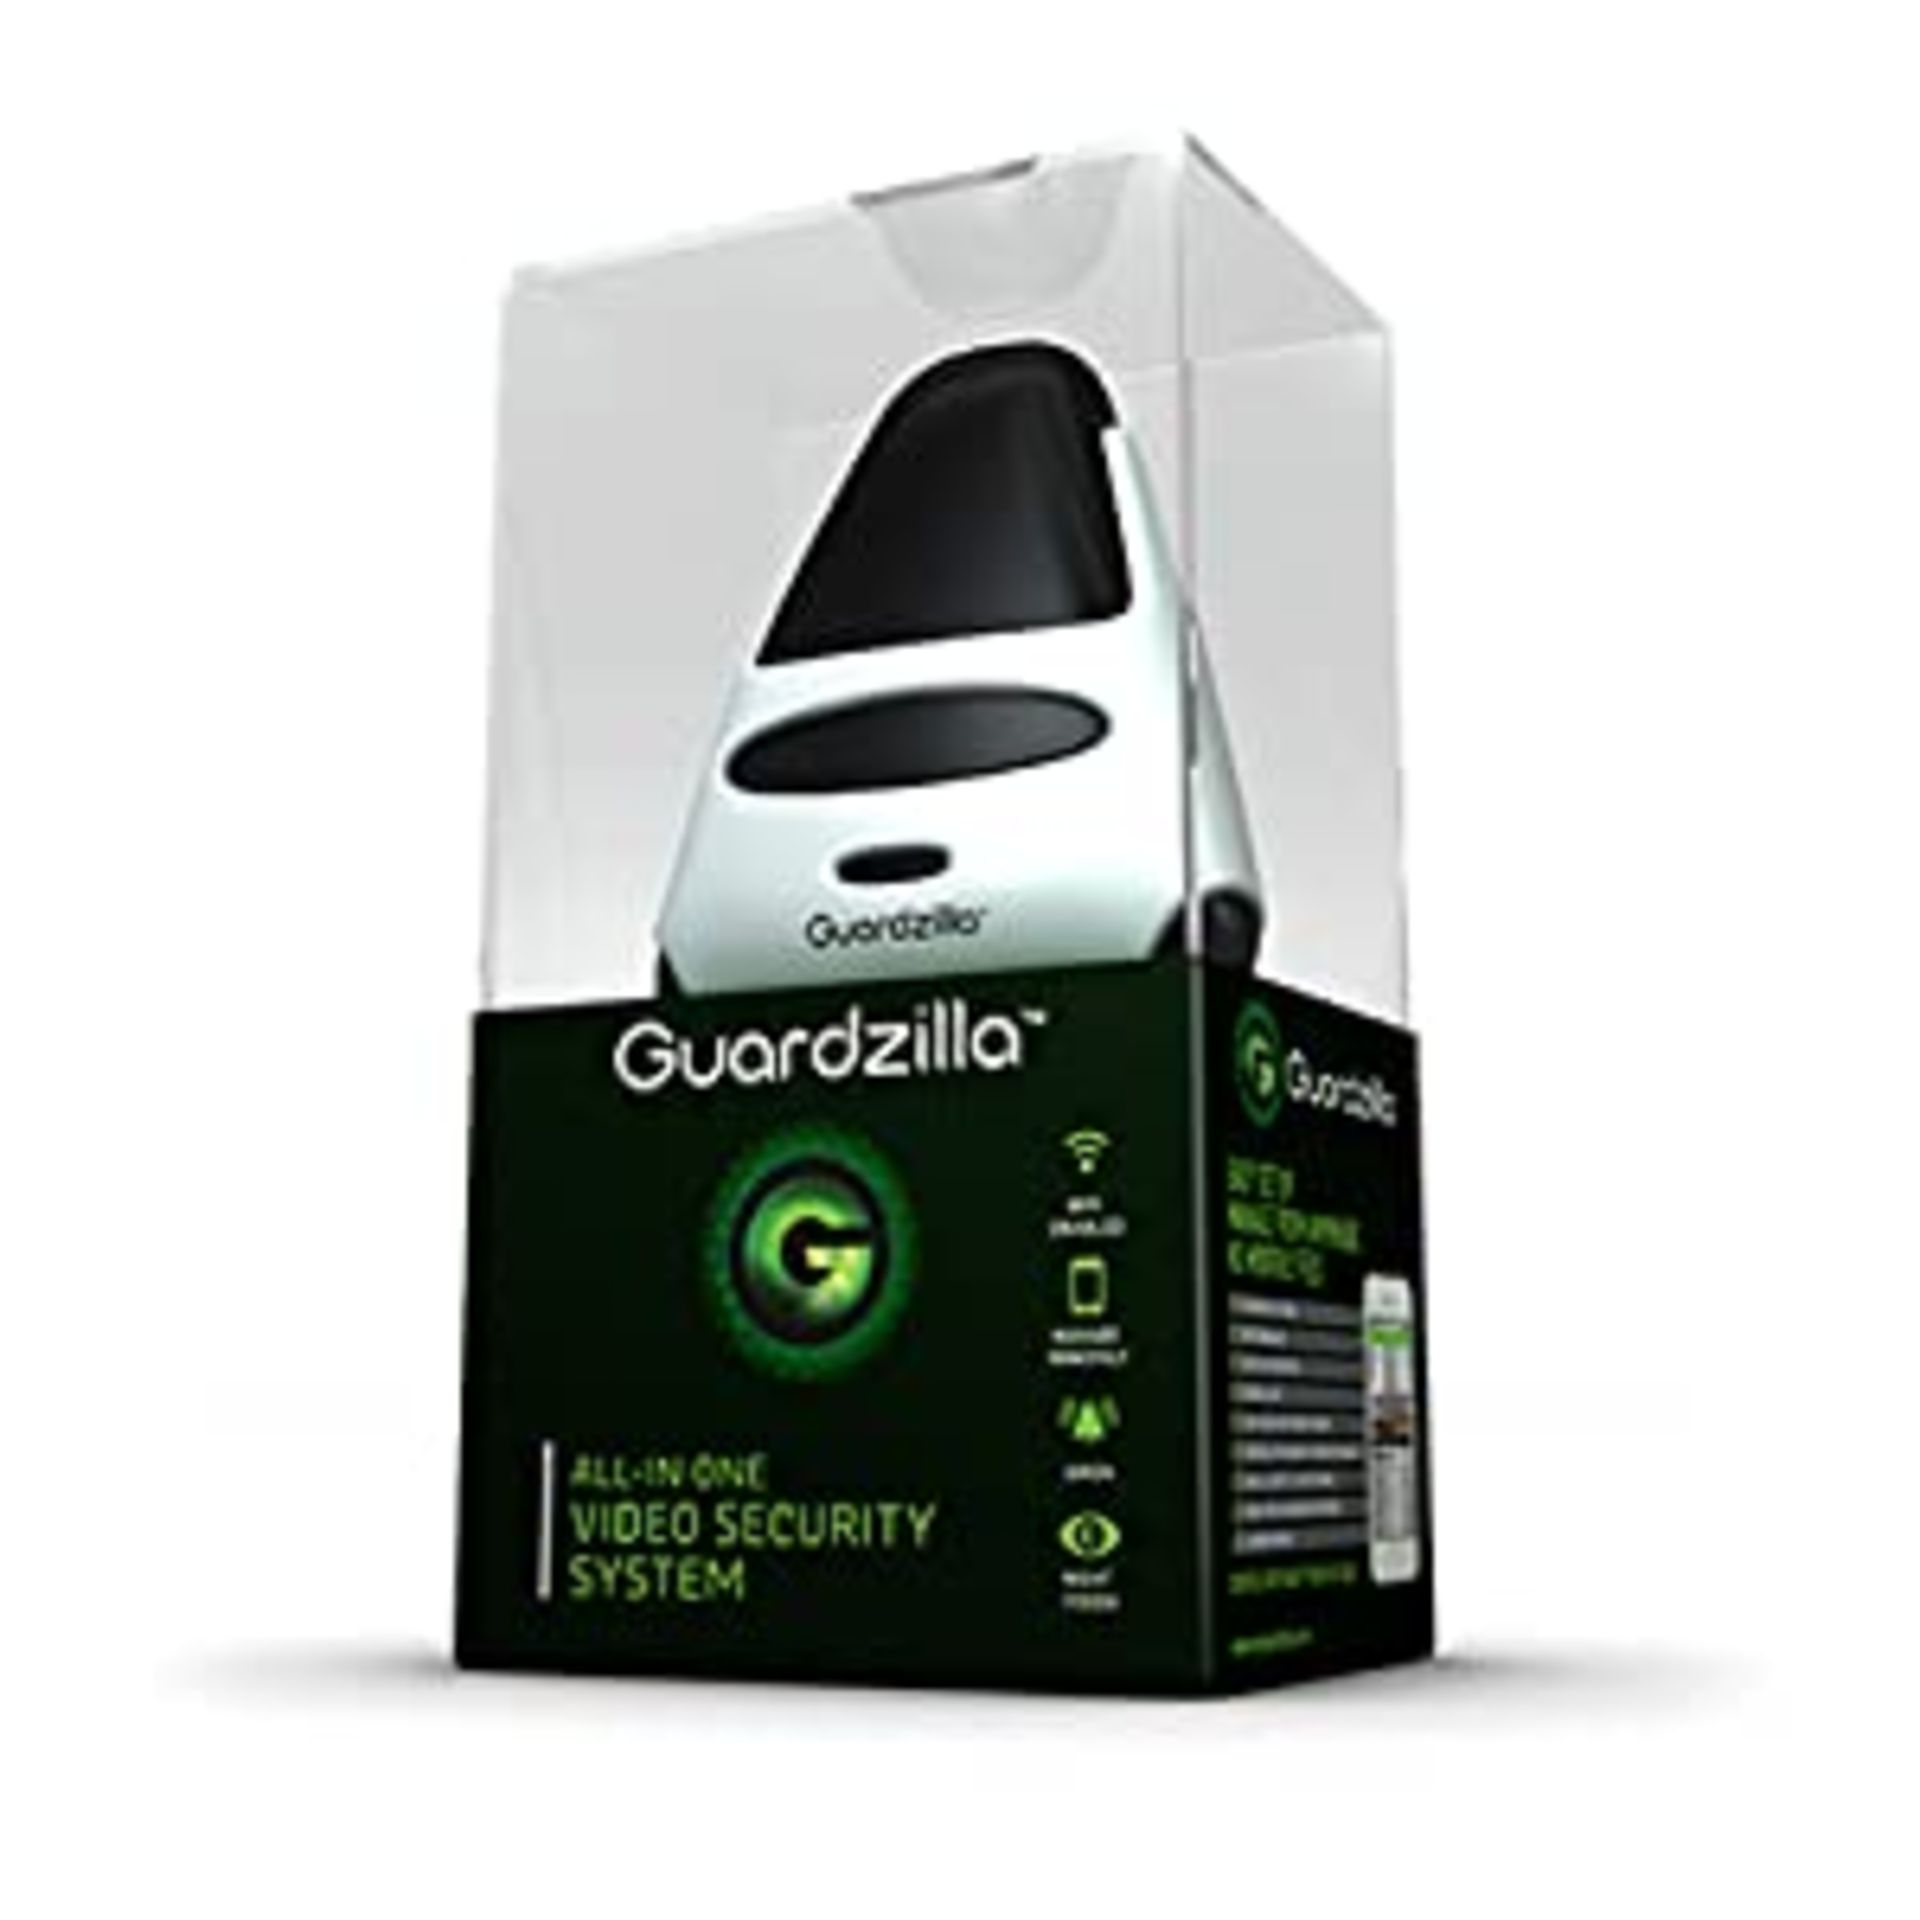 2 x Guardzilla All-In-One HD Security System Including Camera + Siren + Smartphone Remote Capability - Image 7 of 7